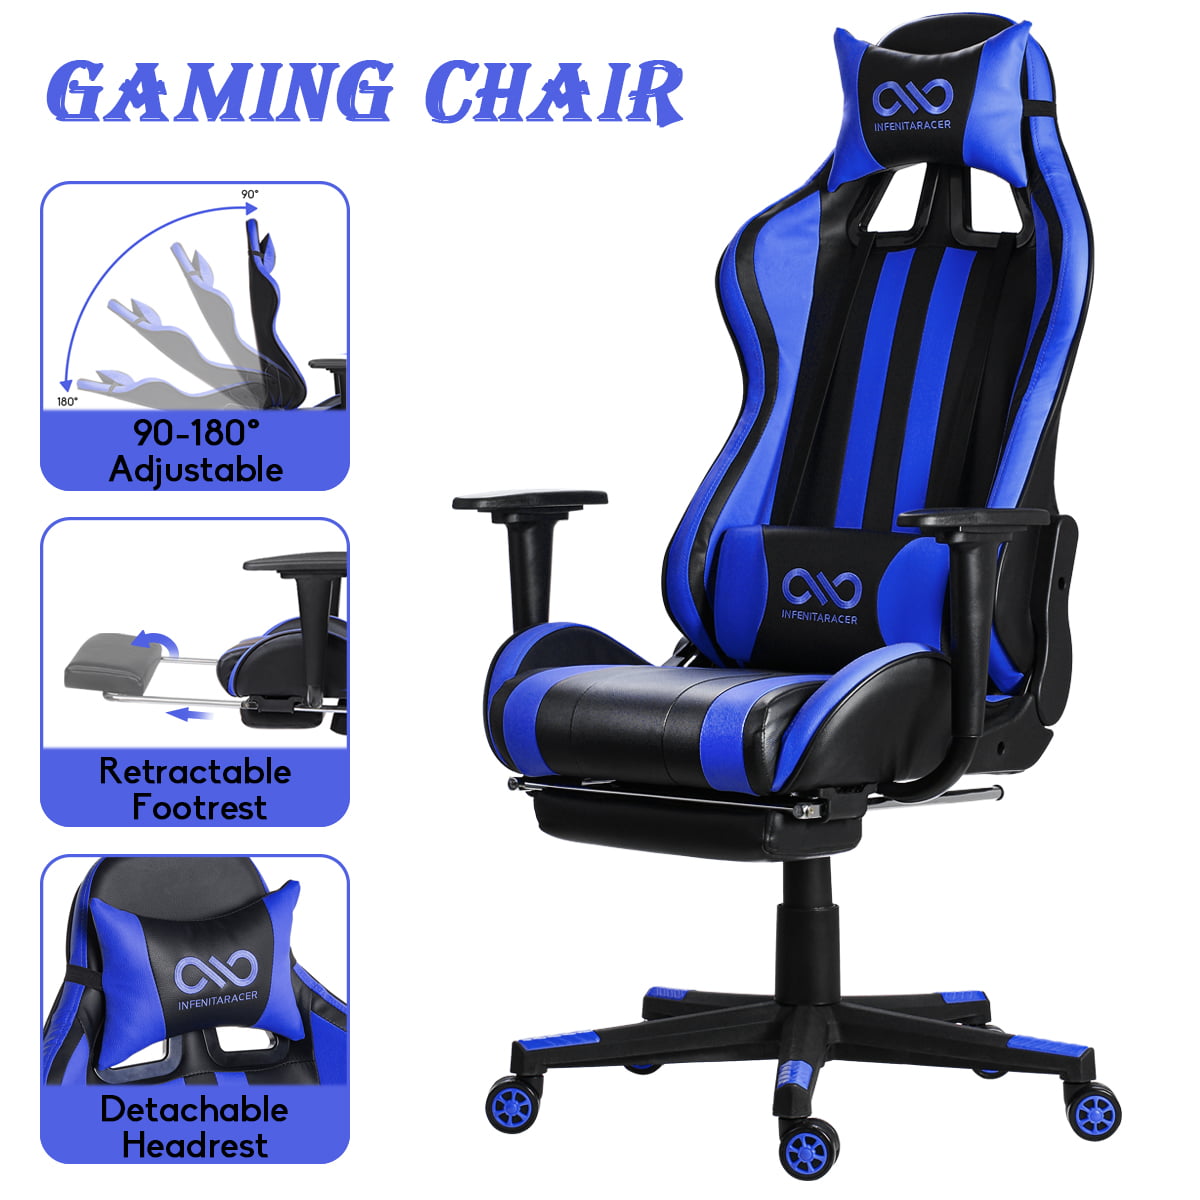 Upgraded Teen's Chair Computer Gaming Racing Chair